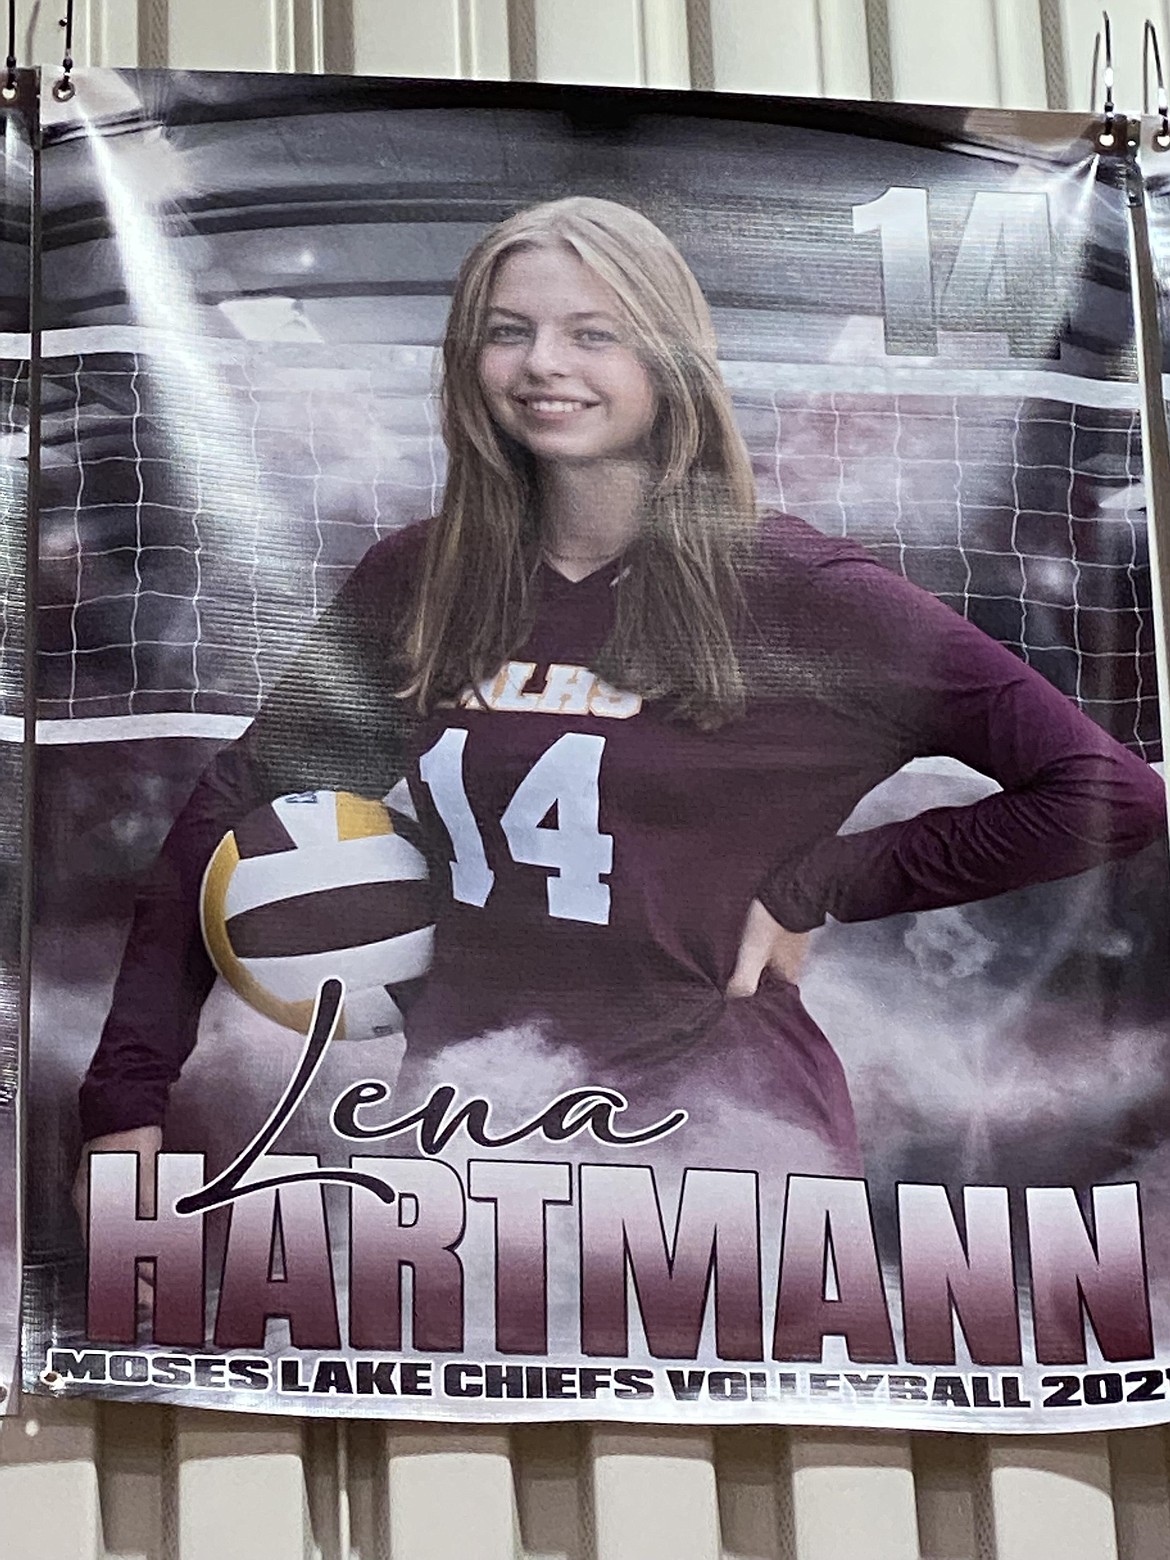 Lena Hartmann as a member of the MLHS Chiefs girls volleyball team. In addition to participating in sports, Hartman was also able to obtain her Washington drivers license while living here as an exchange student.